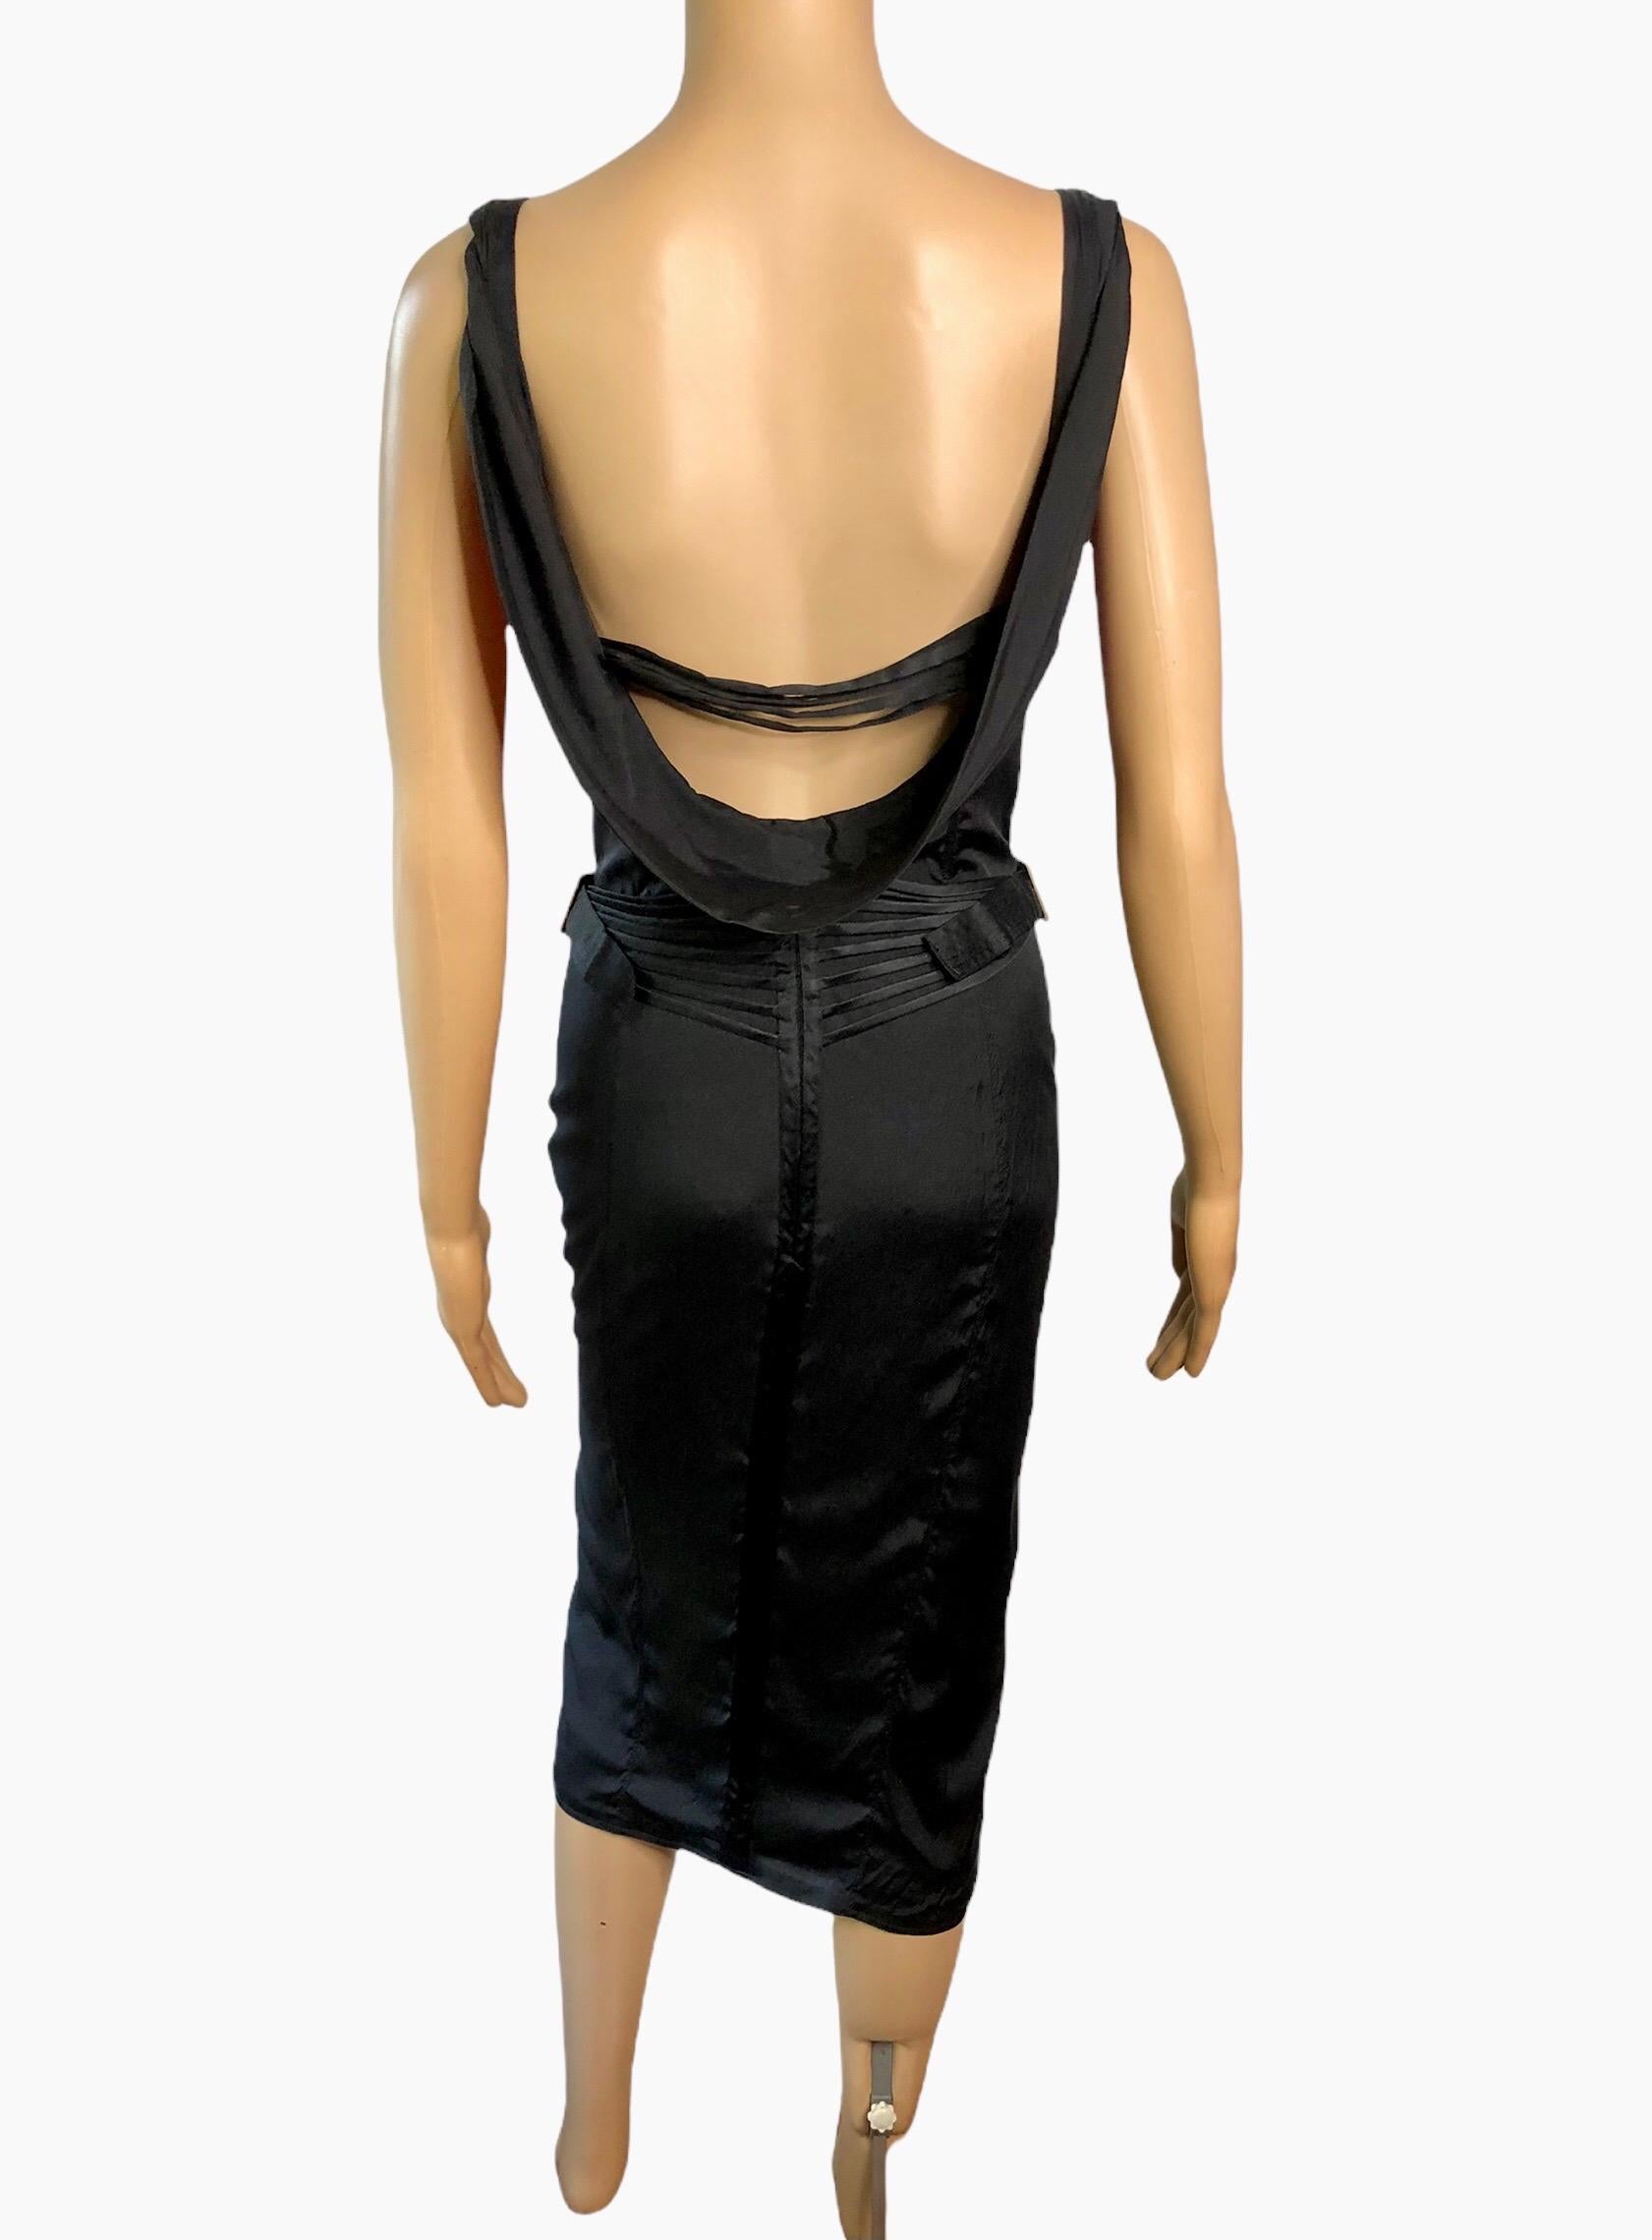 Tom Ford for Gucci F/W 2003 Runway Bustier Corset Silk Black Dress For Sale 1